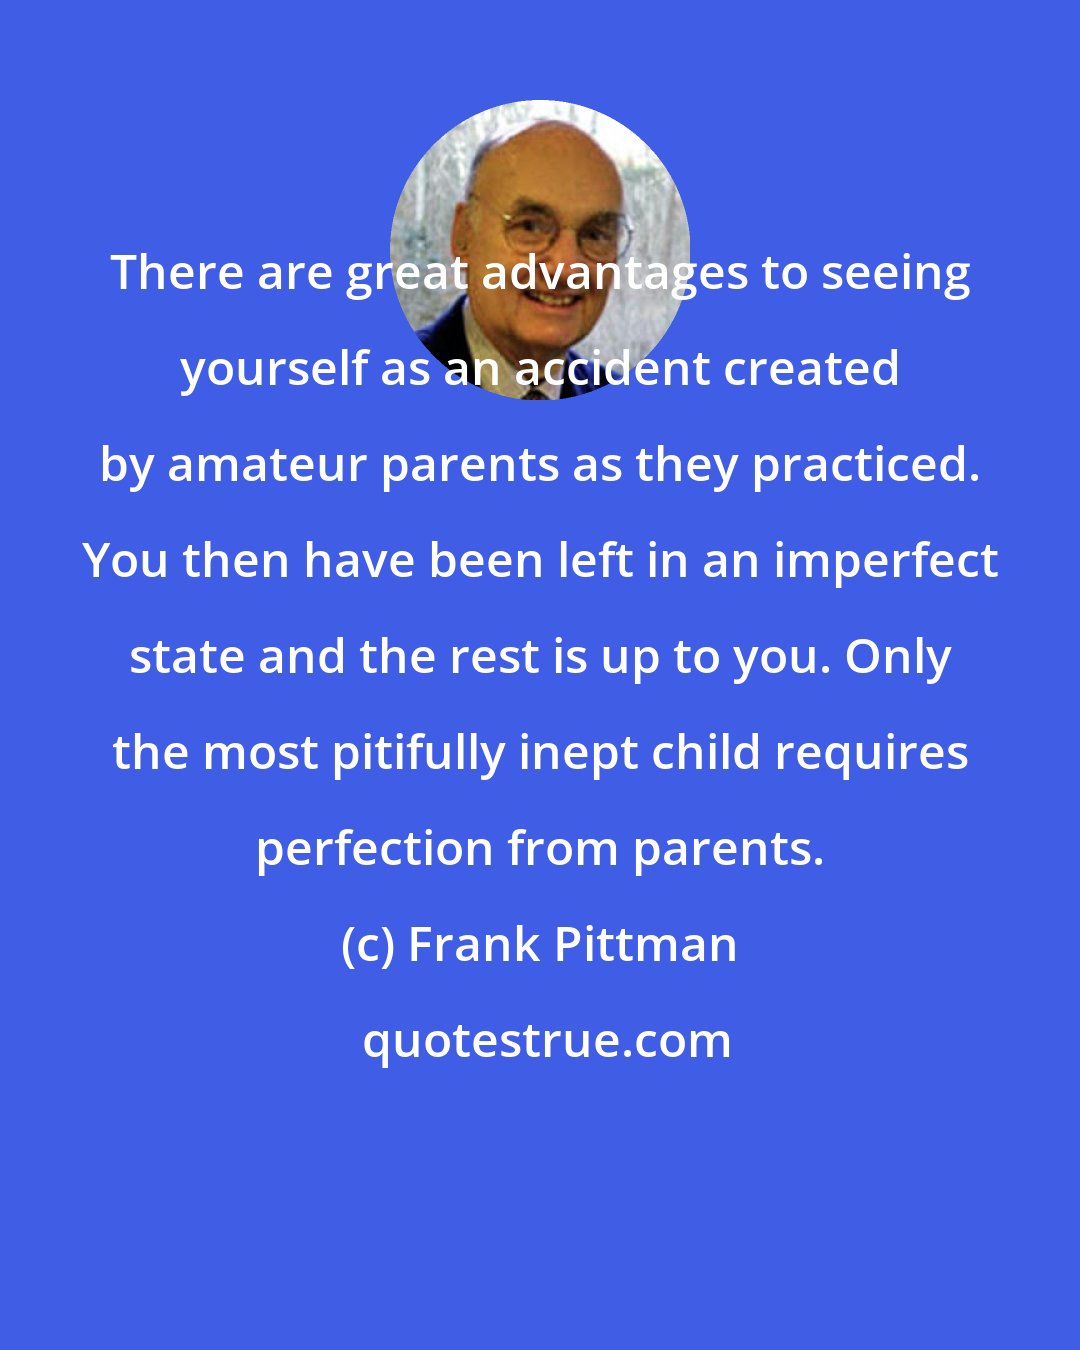 Frank Pittman: There are great advantages to seeing yourself as an accident created by amateur parents as they practiced. You then have been left in an imperfect state and the rest is up to you. Only the most pitifully inept child requires perfection from parents.